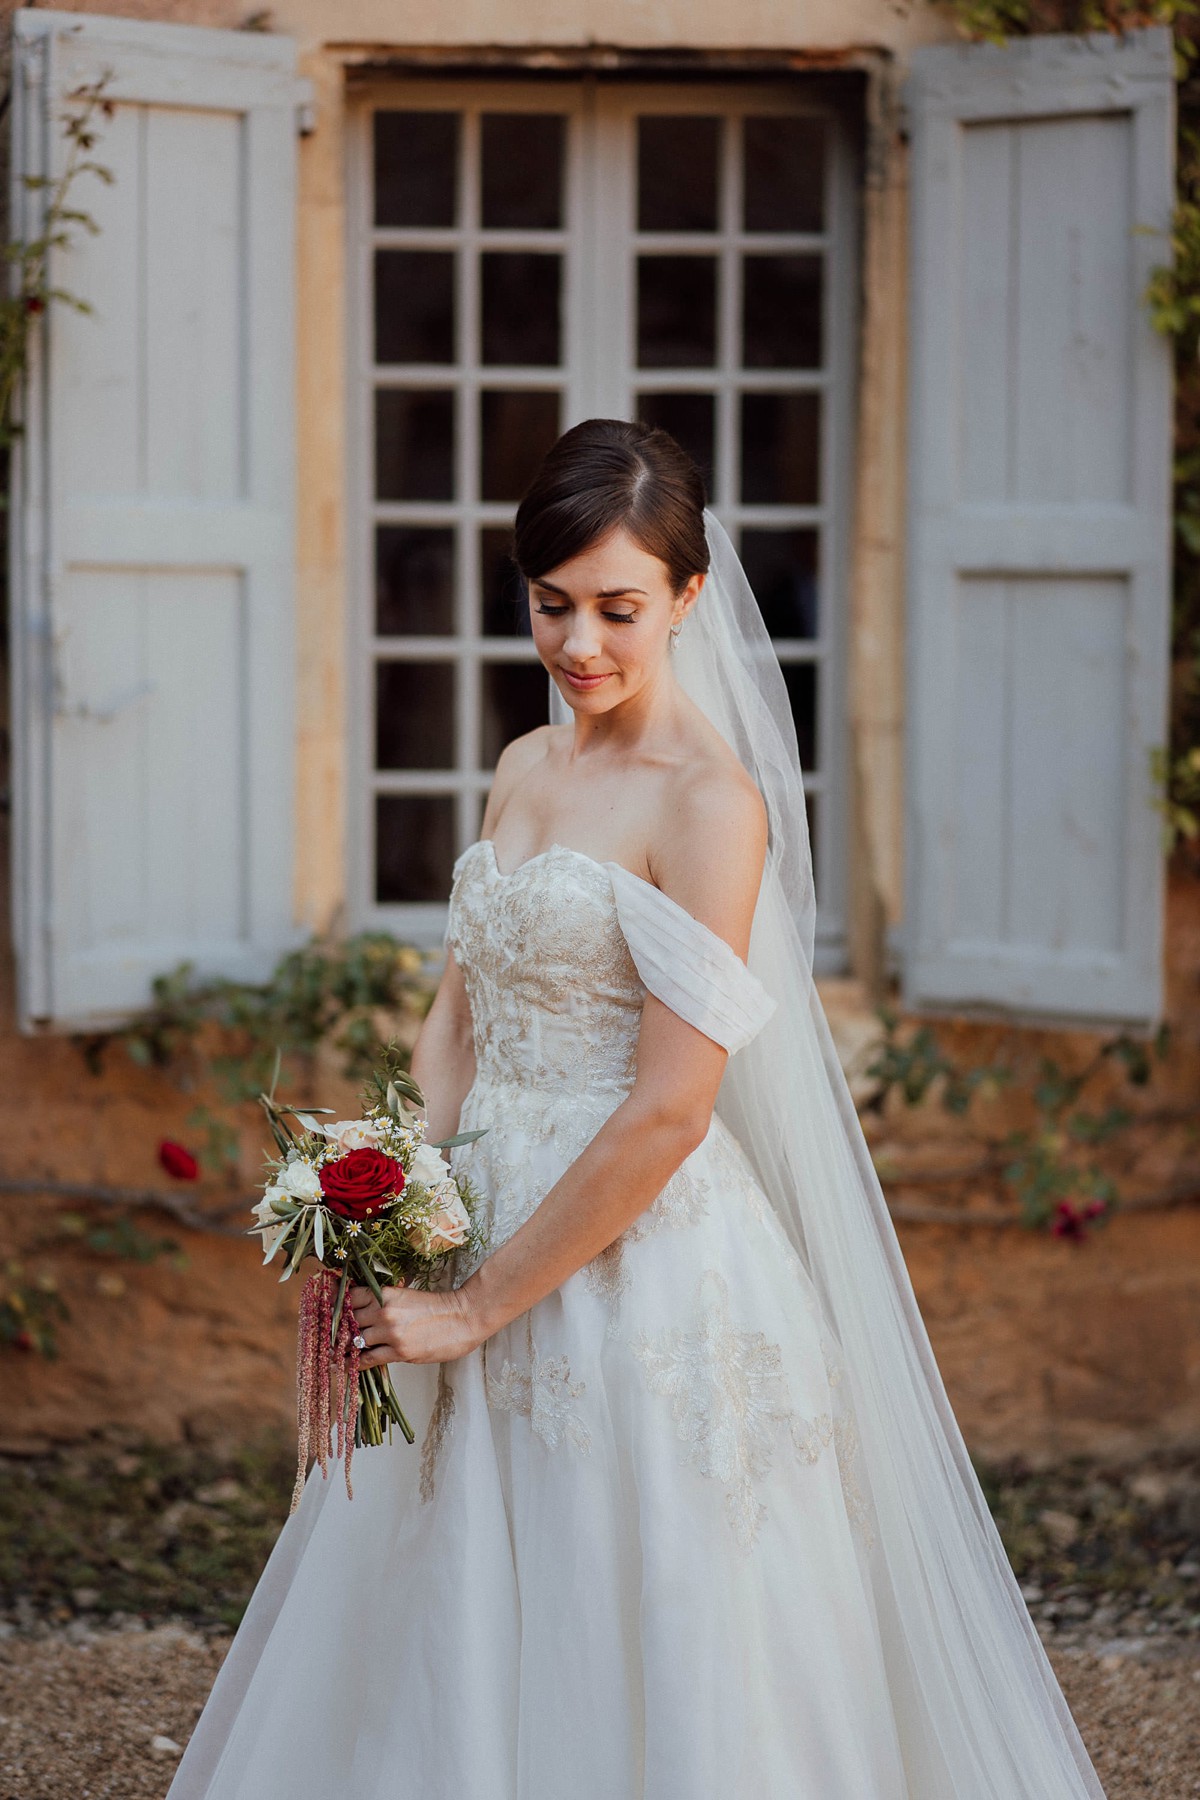 34 Outdoor French Chateau wedding Anne Barge dress